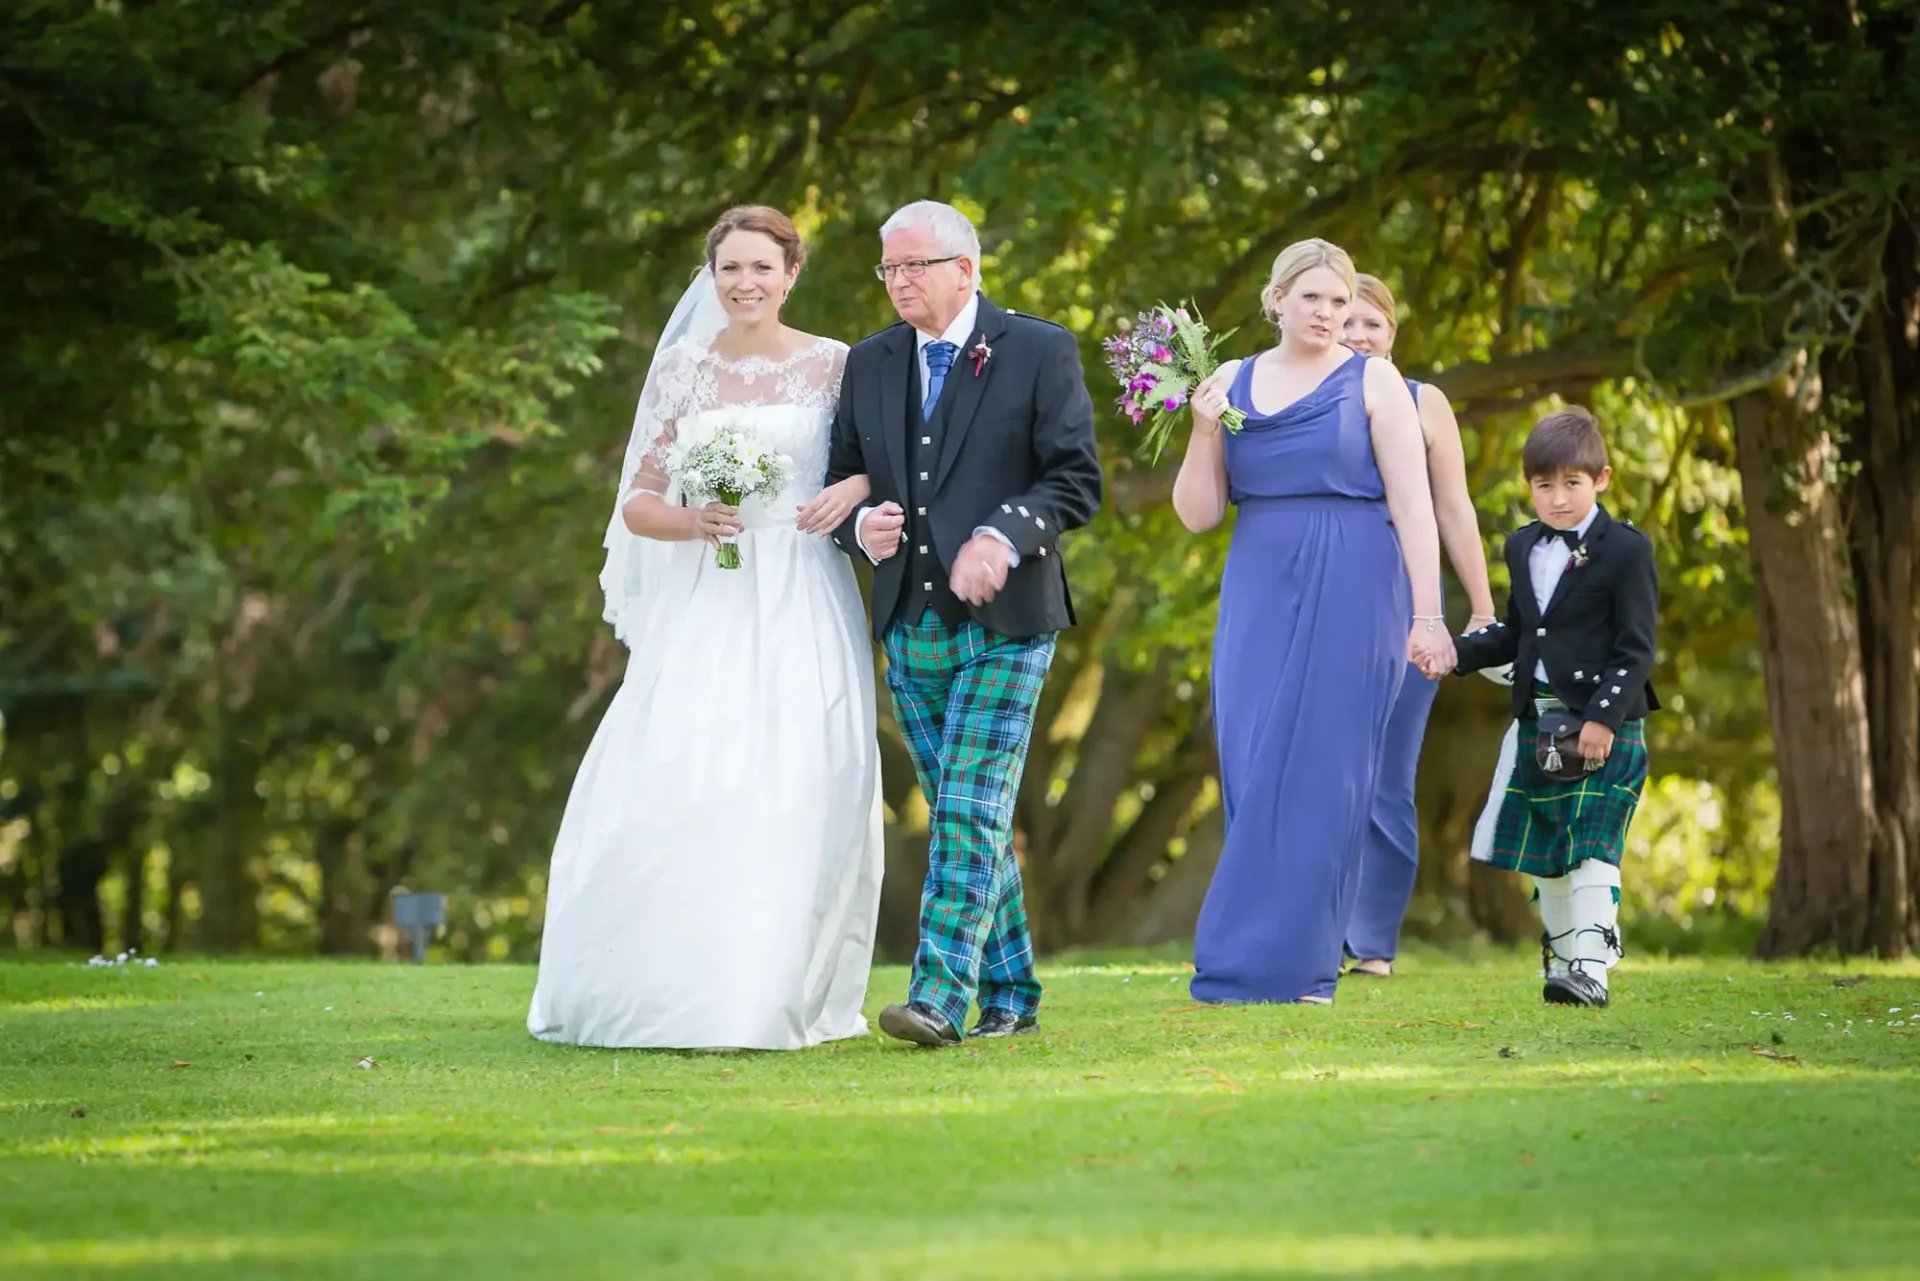 A bride in a white gown, a man in a tartan kilt, a woman in a purple dress, and a young boy in a kilt walk on a grassy path, smiling.